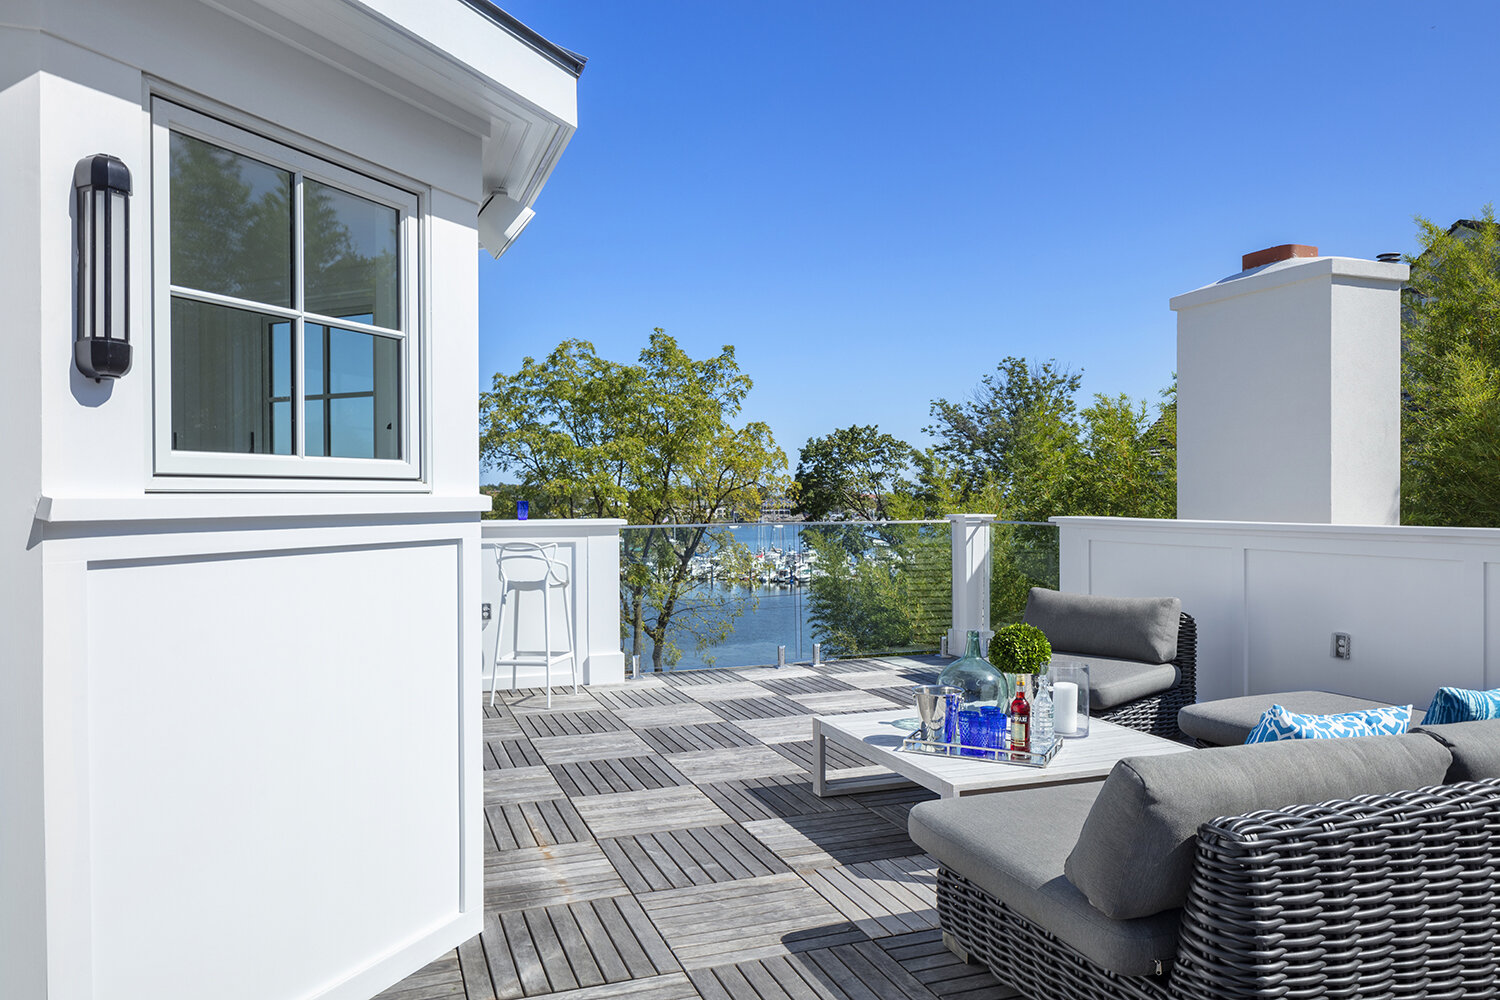  Roof top deck on HOBI award winning private residence. Greenwich, CT